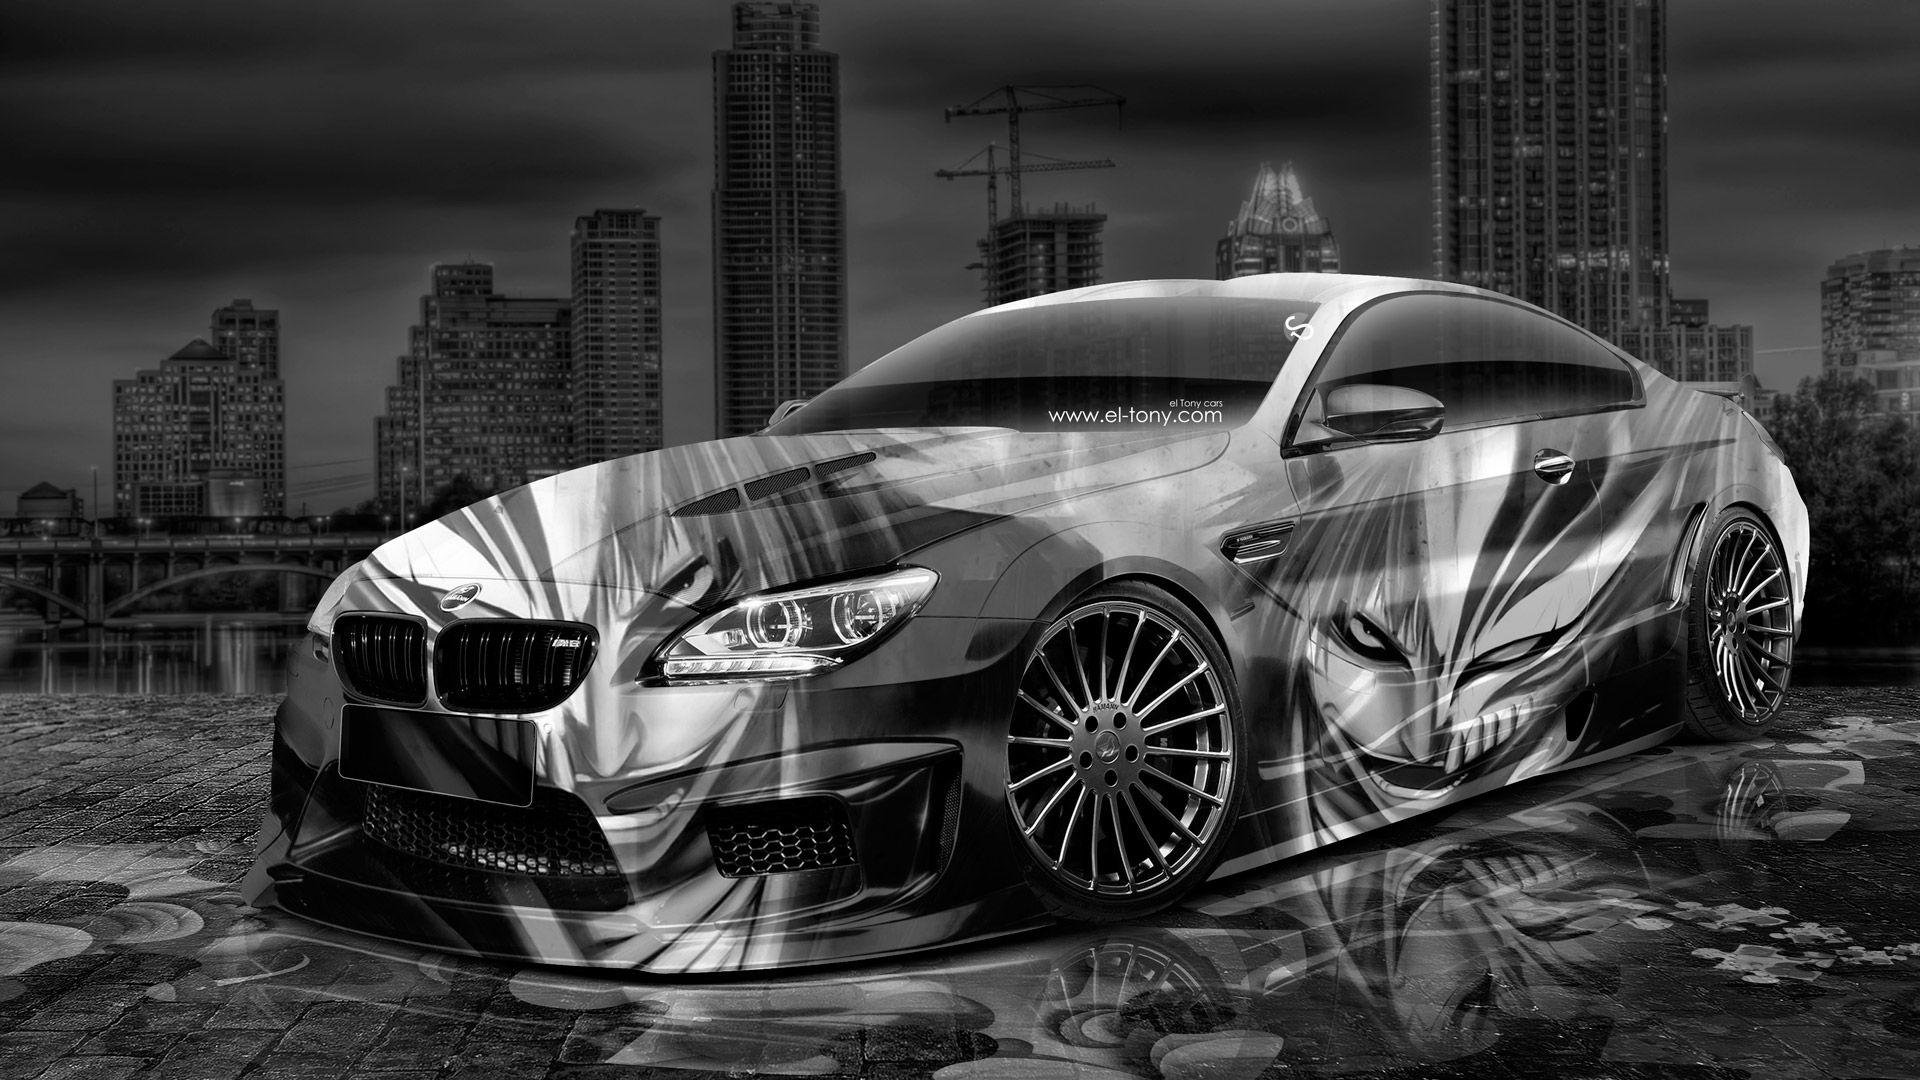 Bmw Car 3D Wallpaper For iPhone For iPhone Wallpaper HD